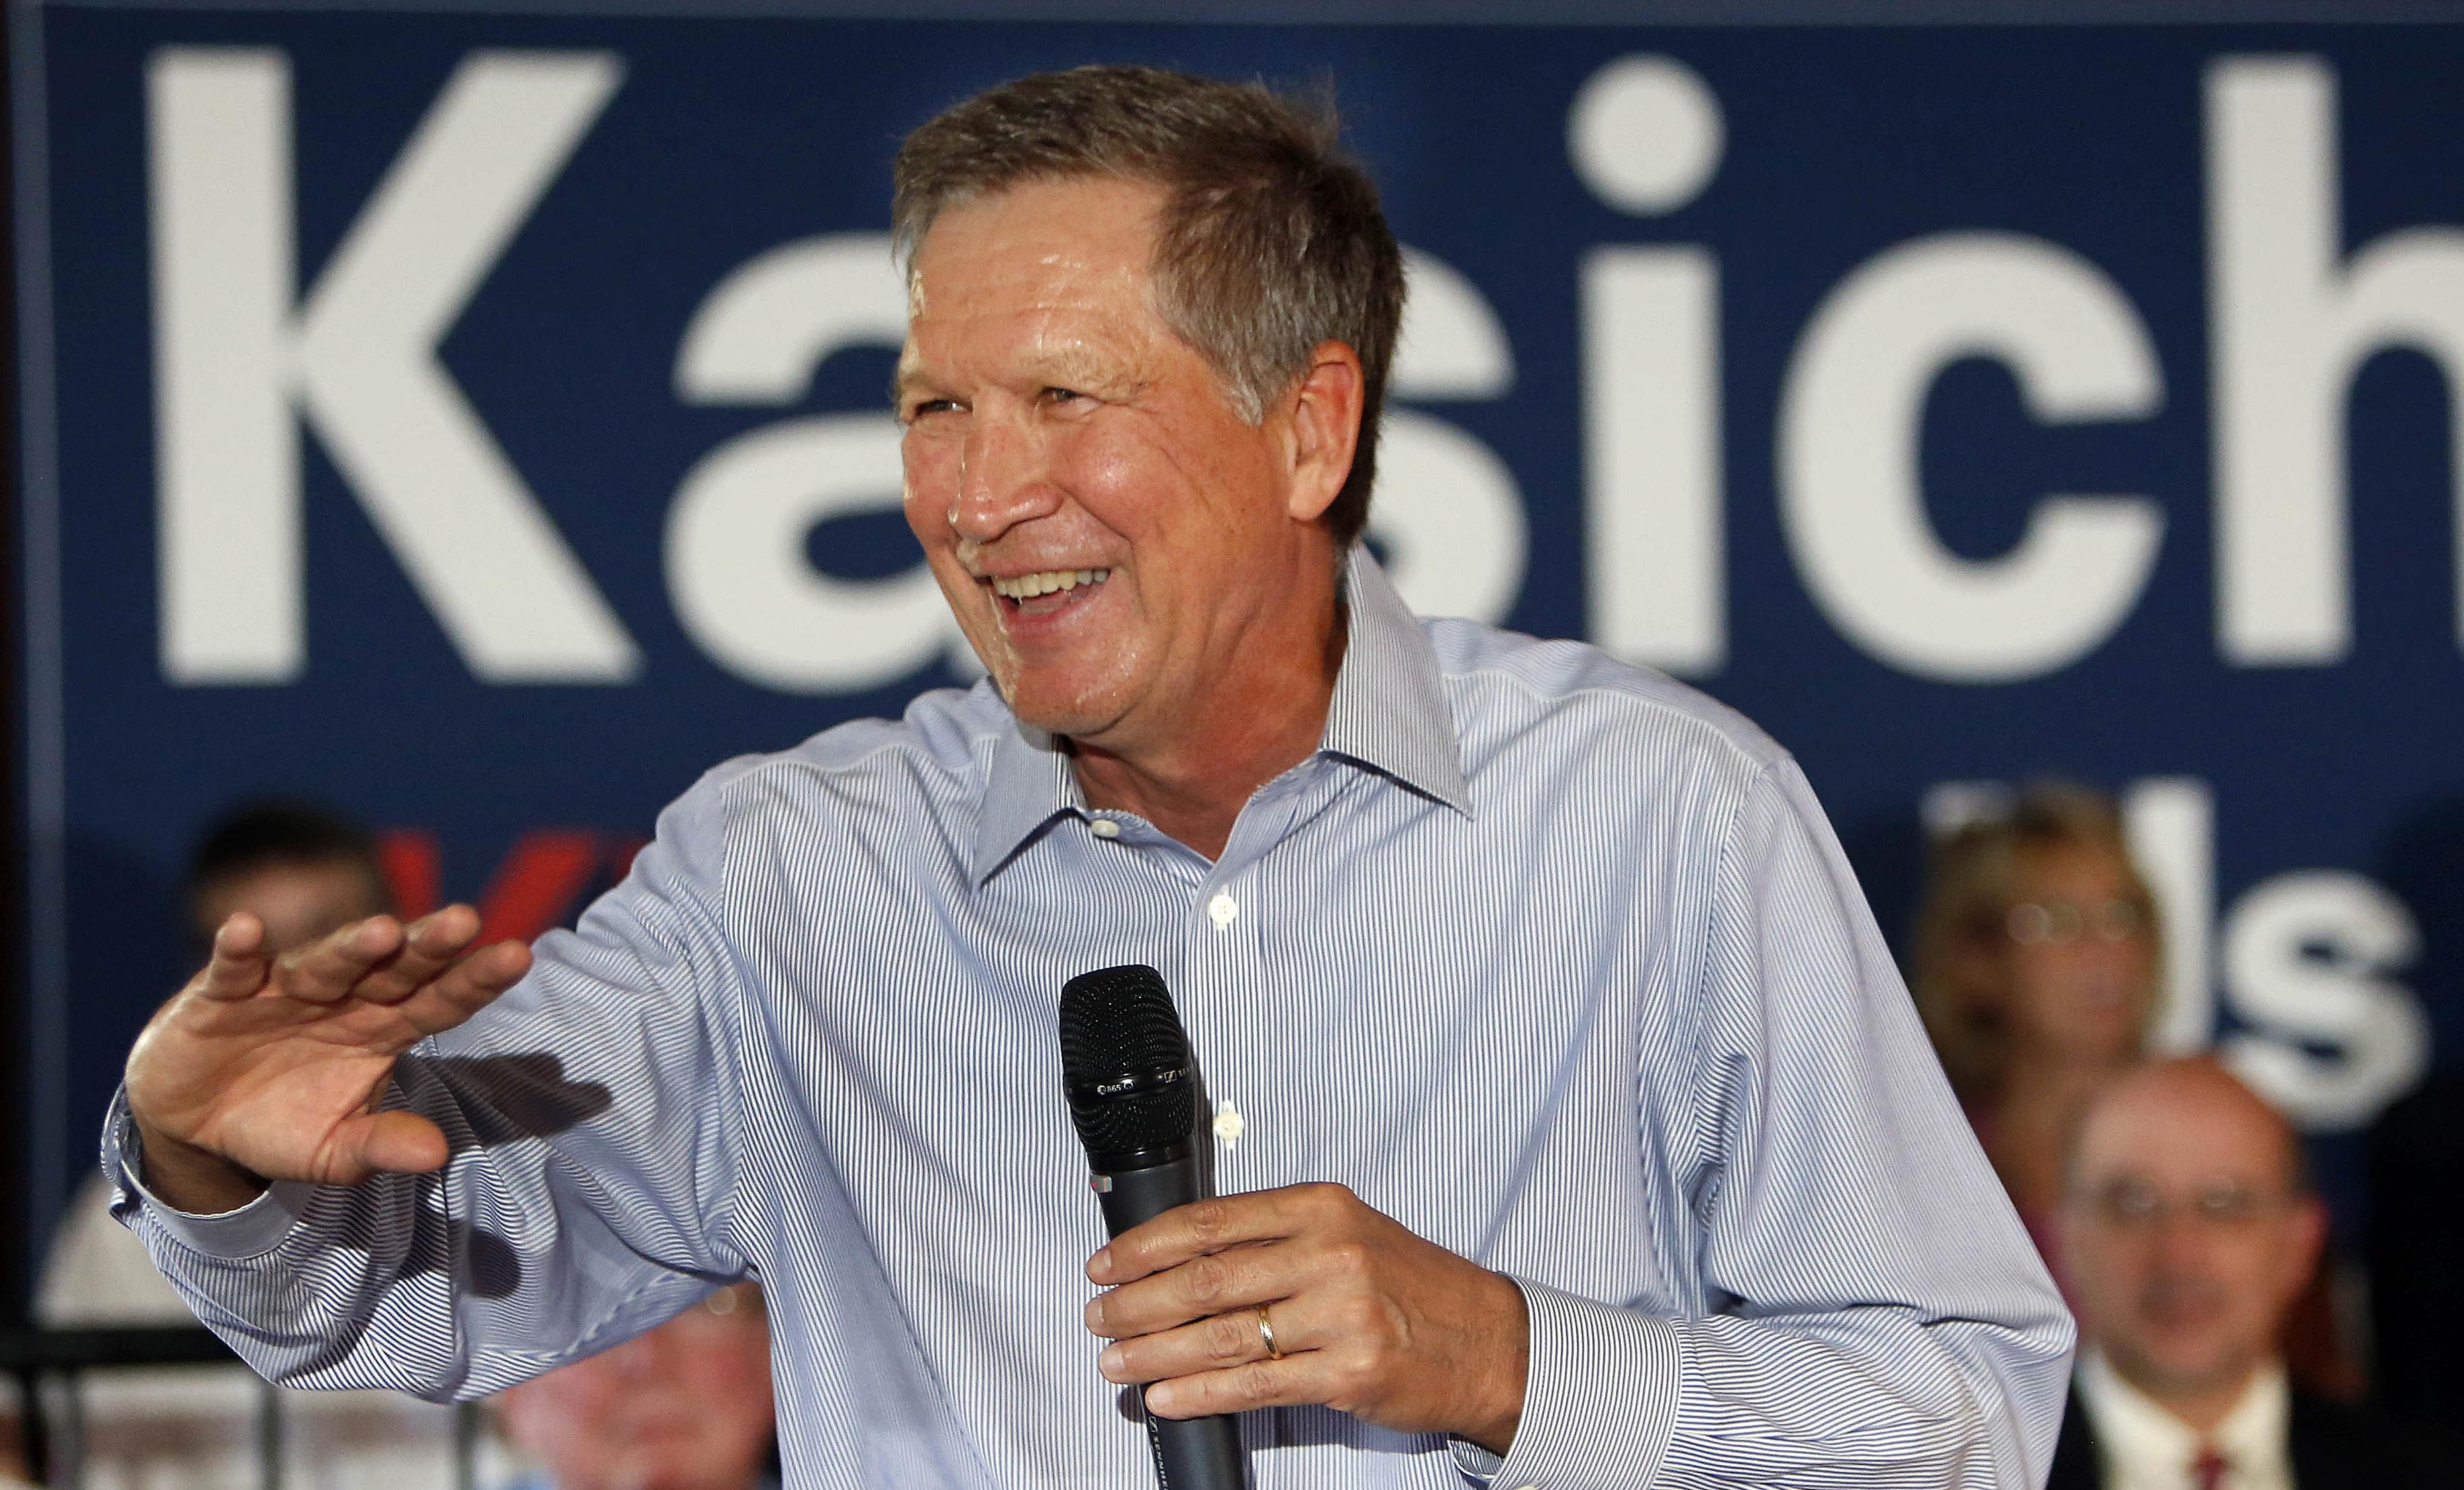 What are some facts about John Kasich?